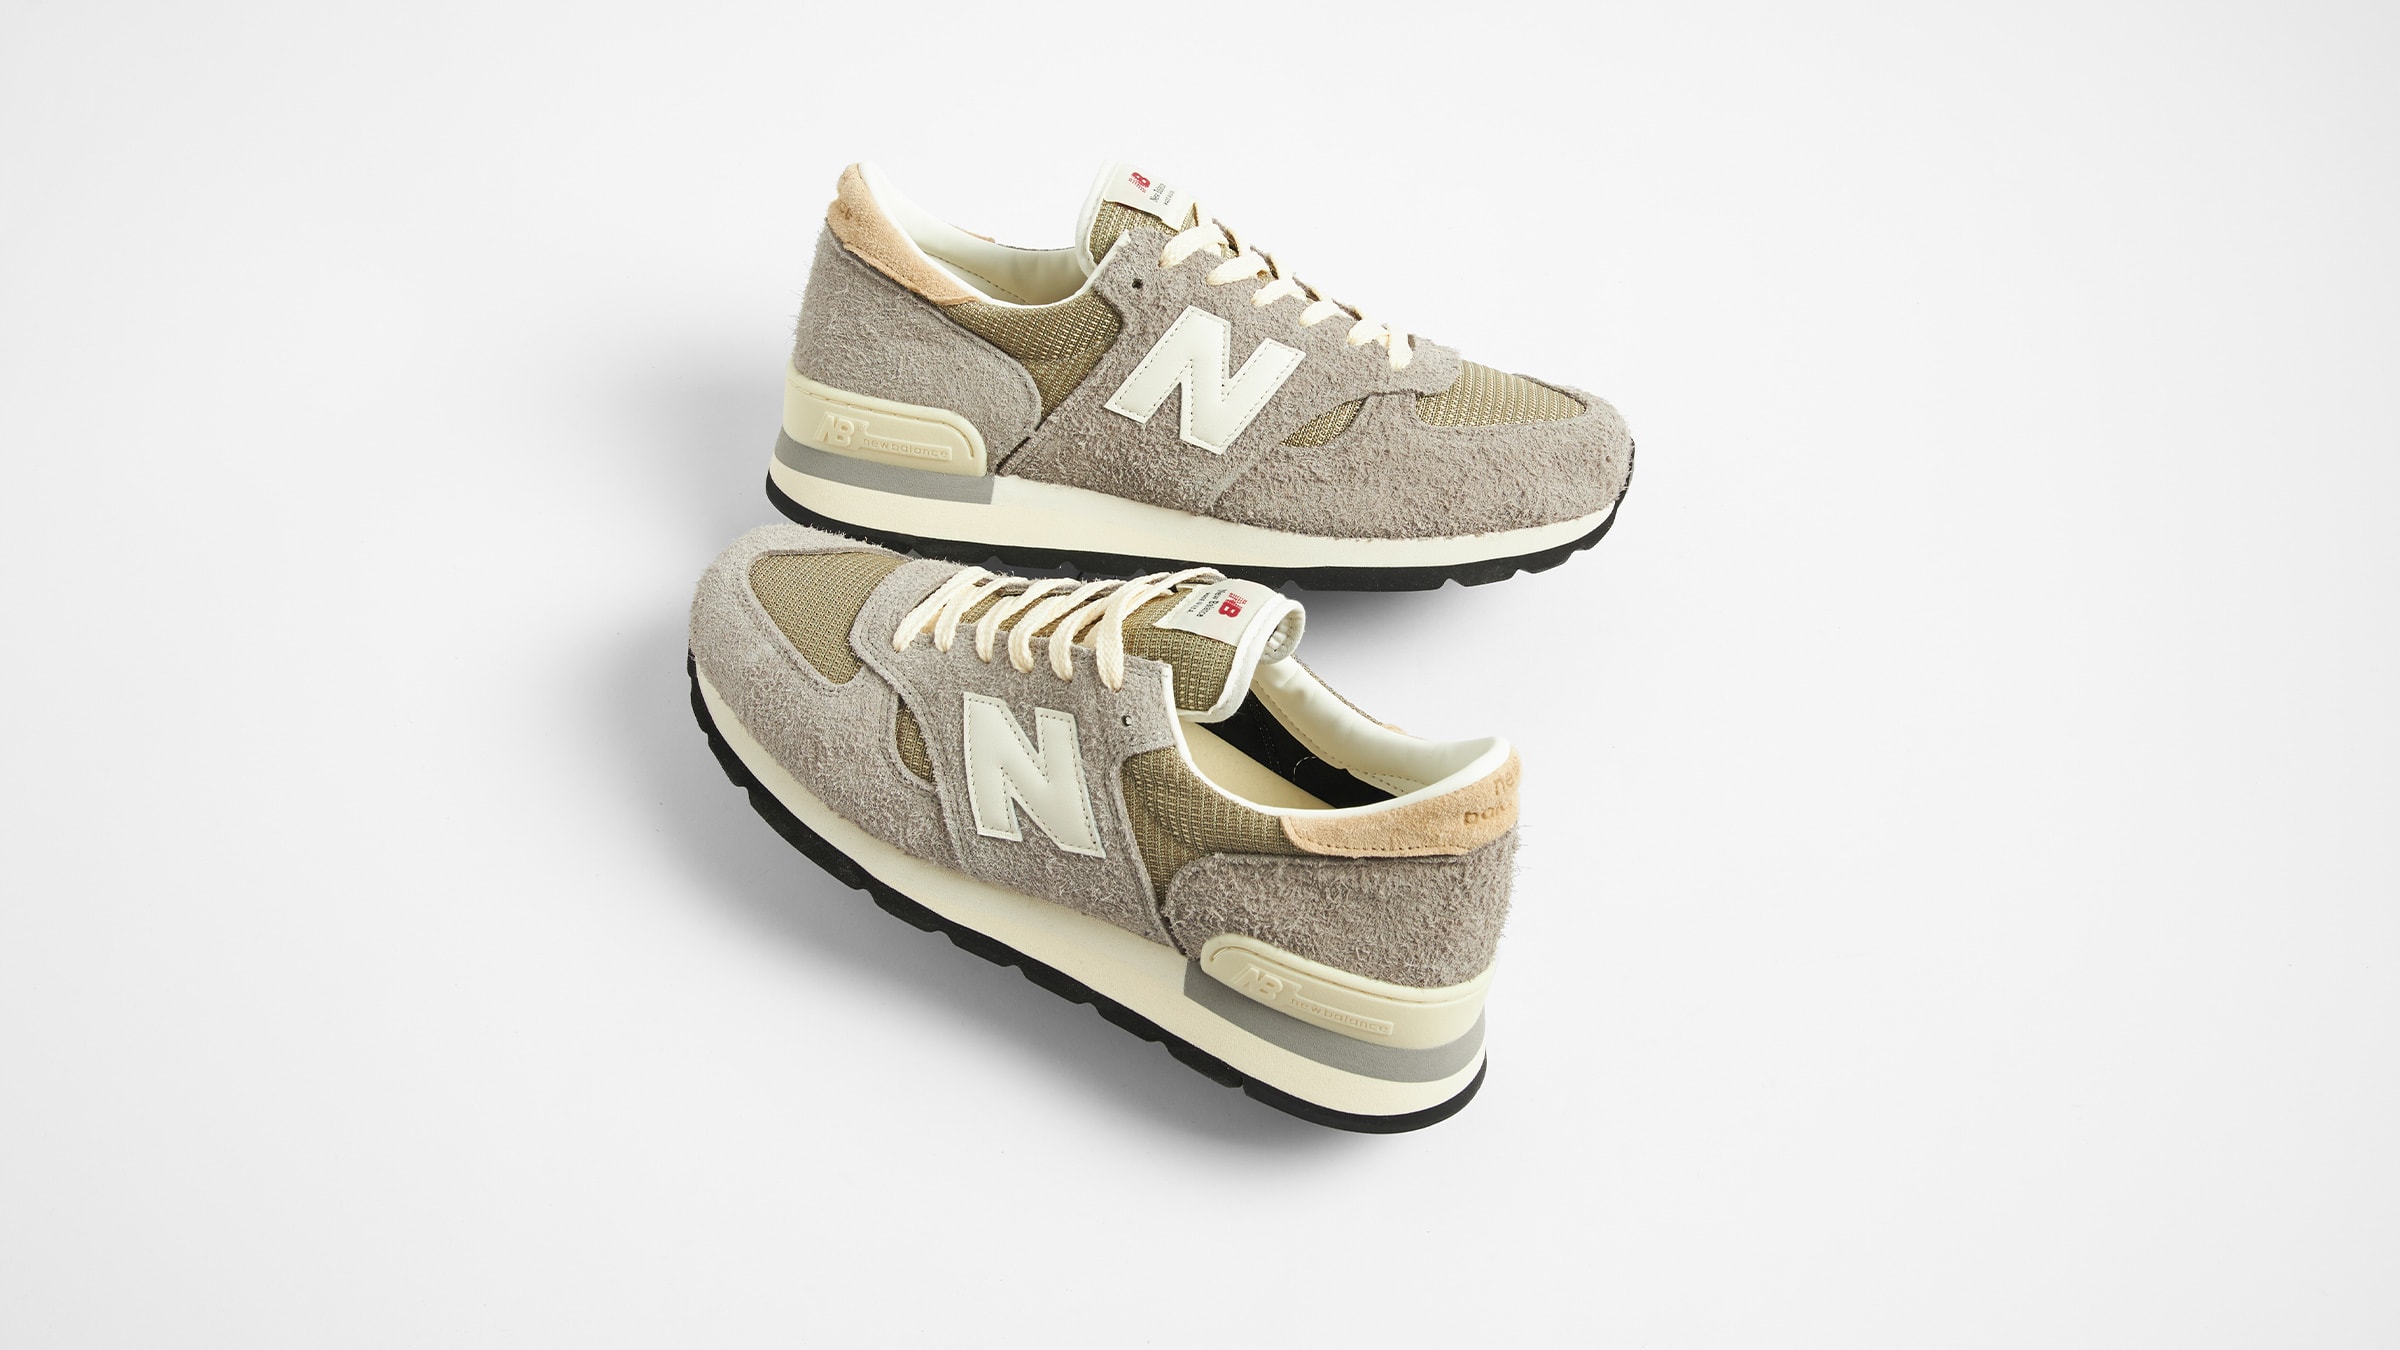 New Balance MTA1   Made in USA Grey & Tan   END. Launches